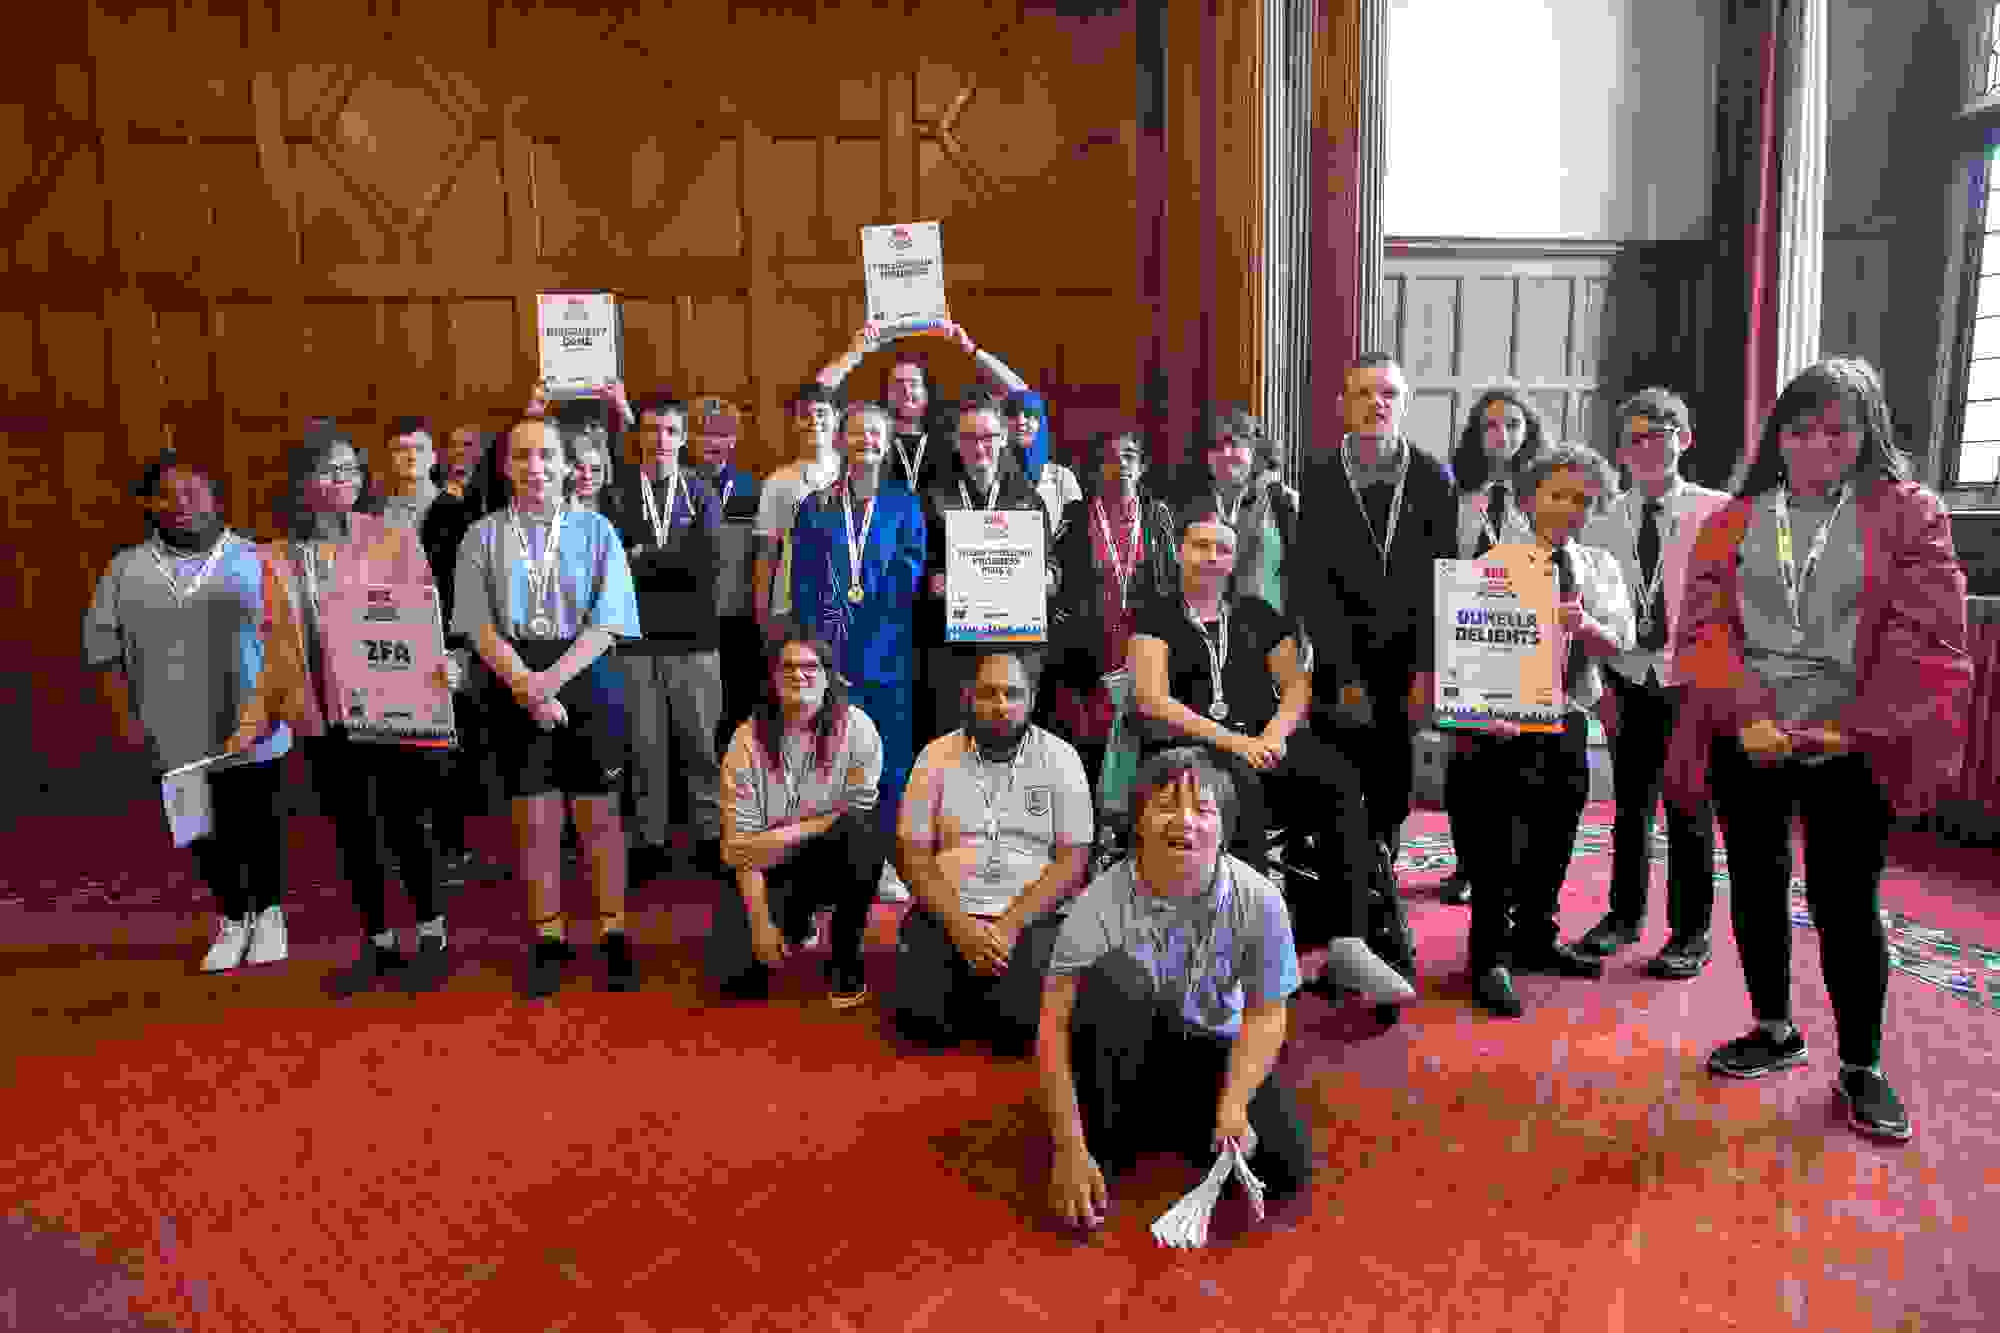 Group of students with their certificates and medal in the town hall with wooden panelling behind them and a red carpet